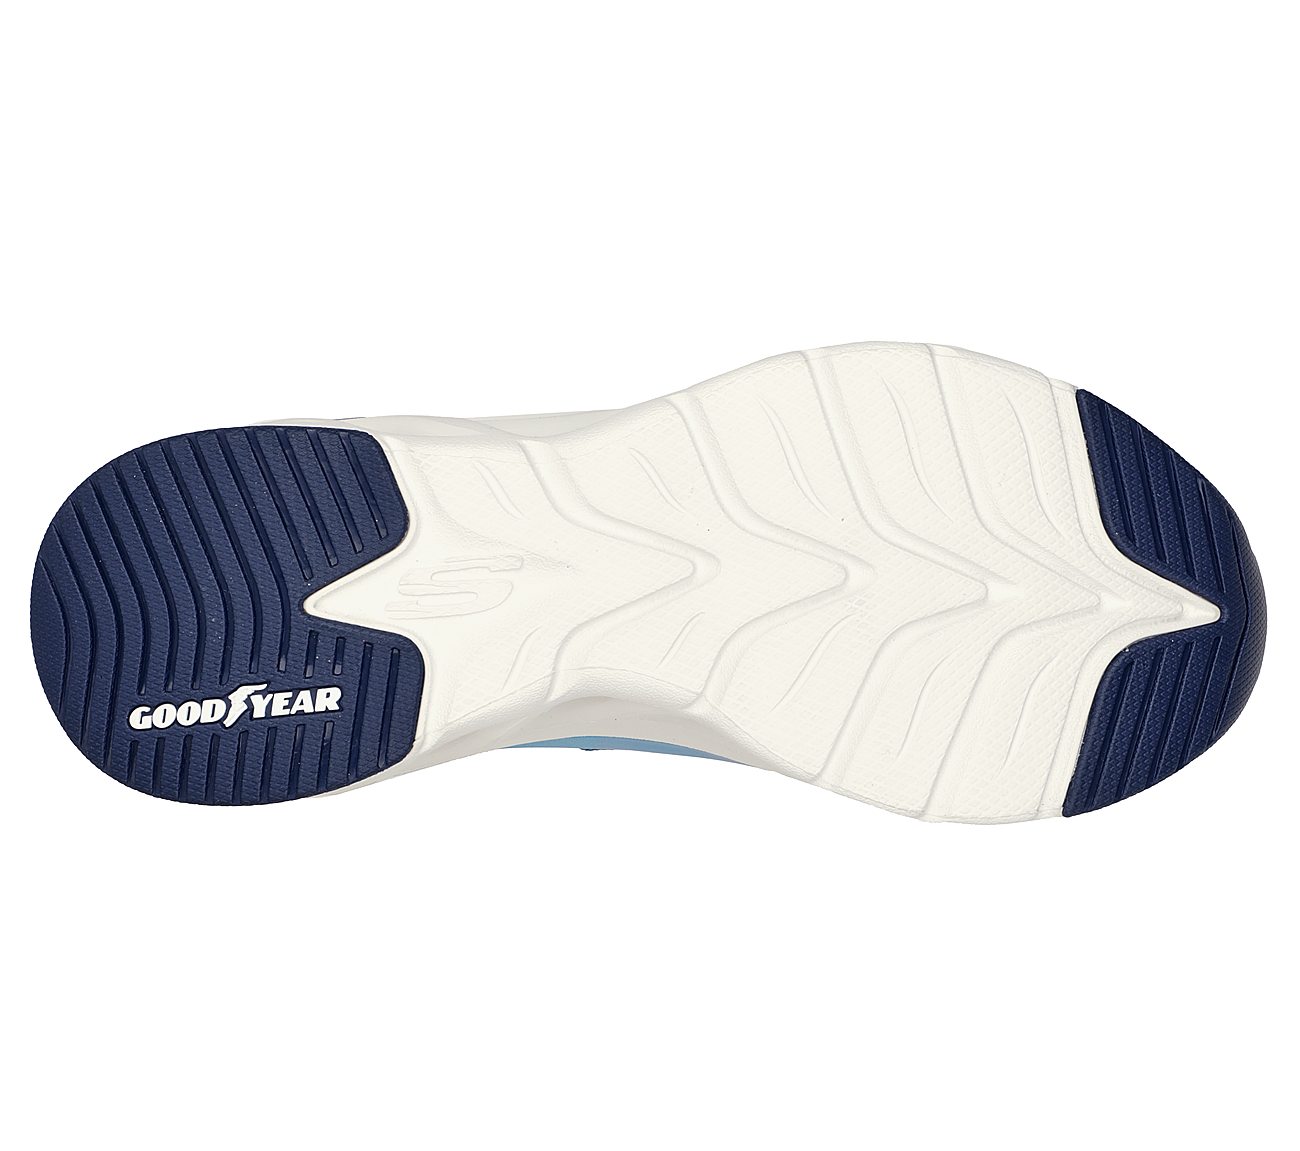 ARCH FIT GLIDE-STEP, NAVY/MULTI Footwear Bottom View